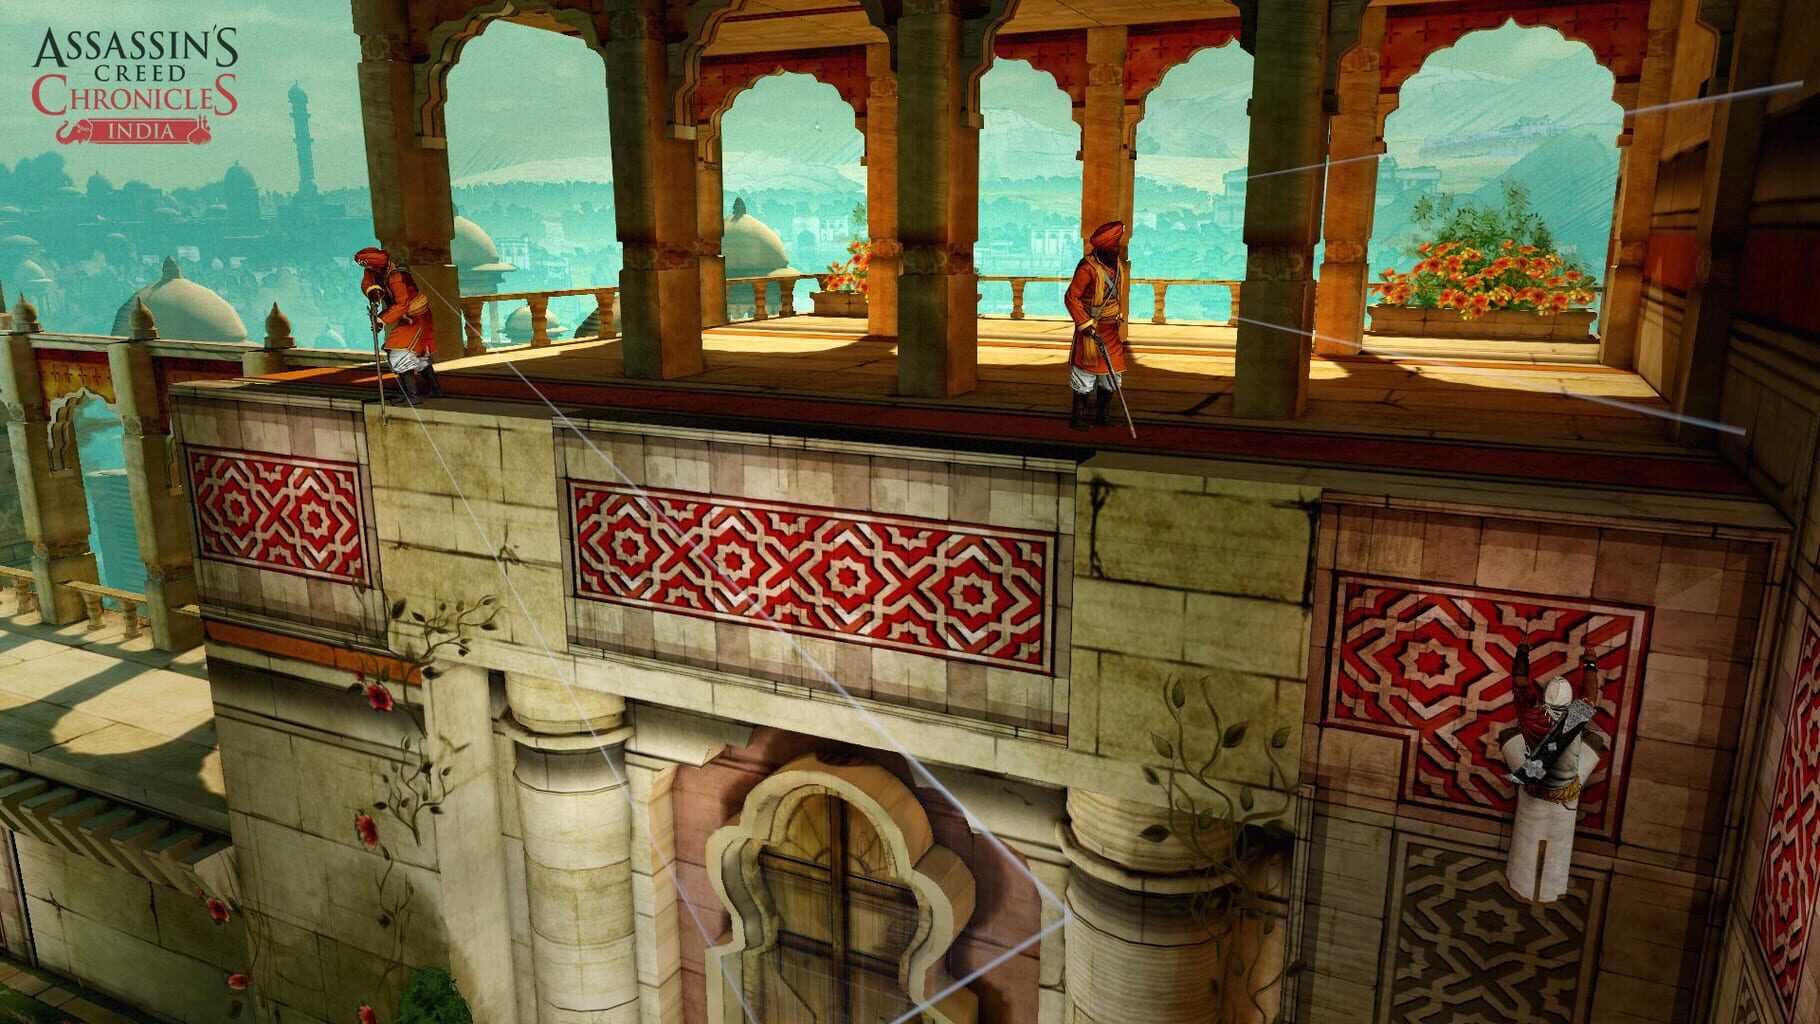 Assassin's Creed Chronicles: India Image